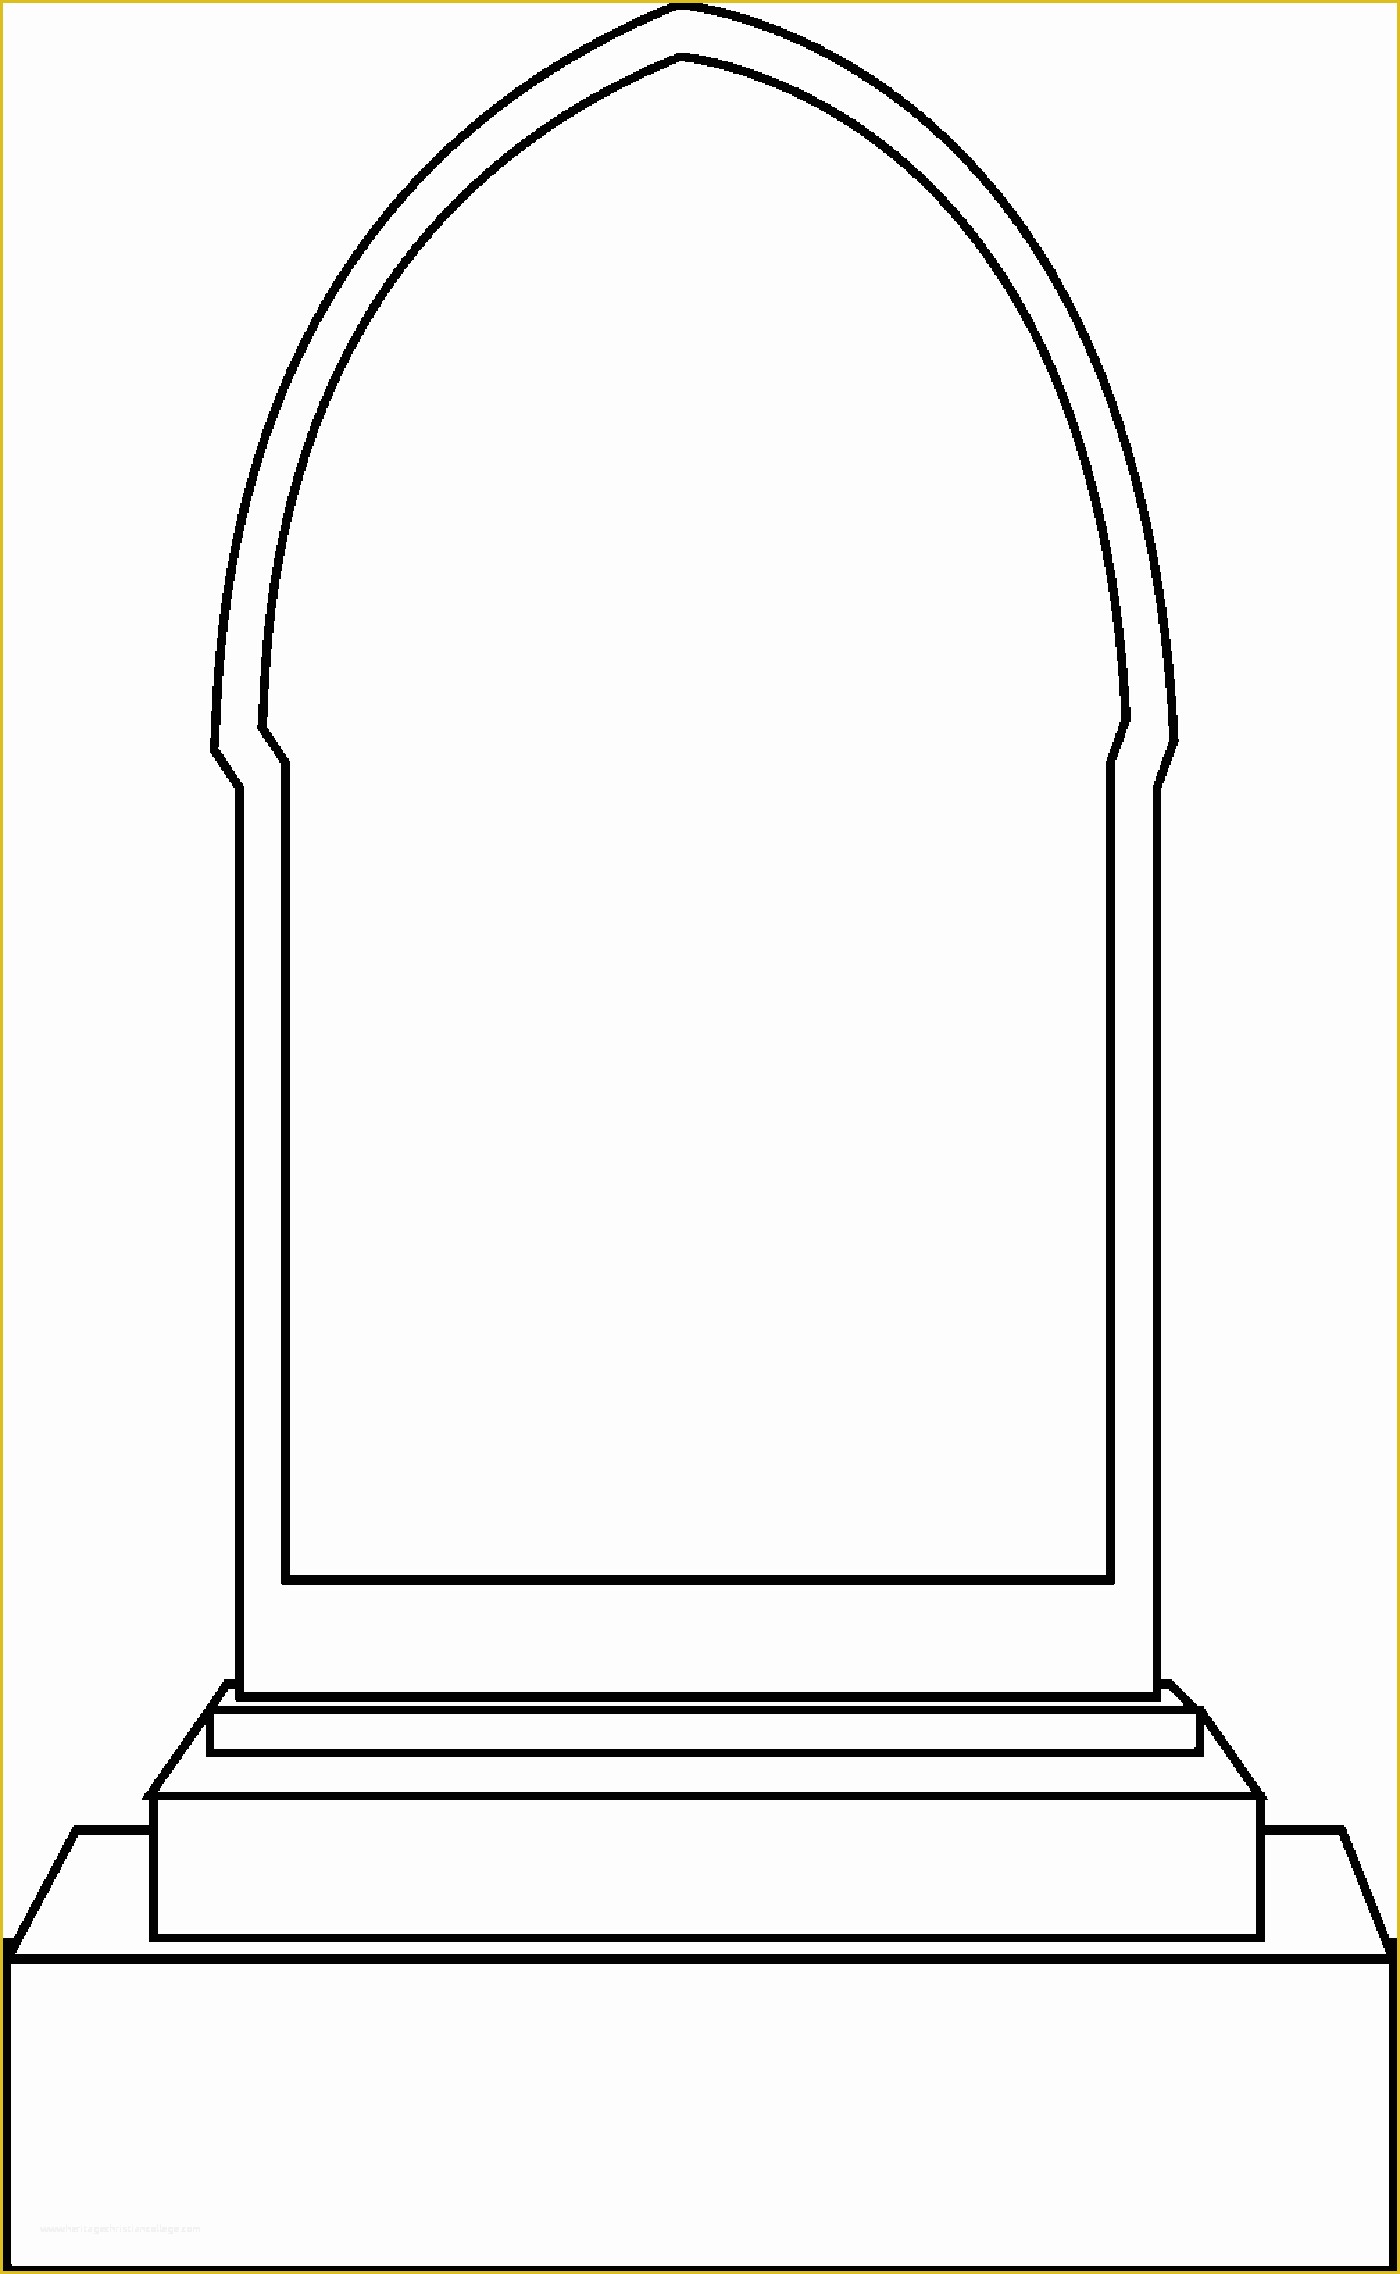 Free Gravestone Template Of Drawn Headstone Clipart Pencil and In Color Drawn